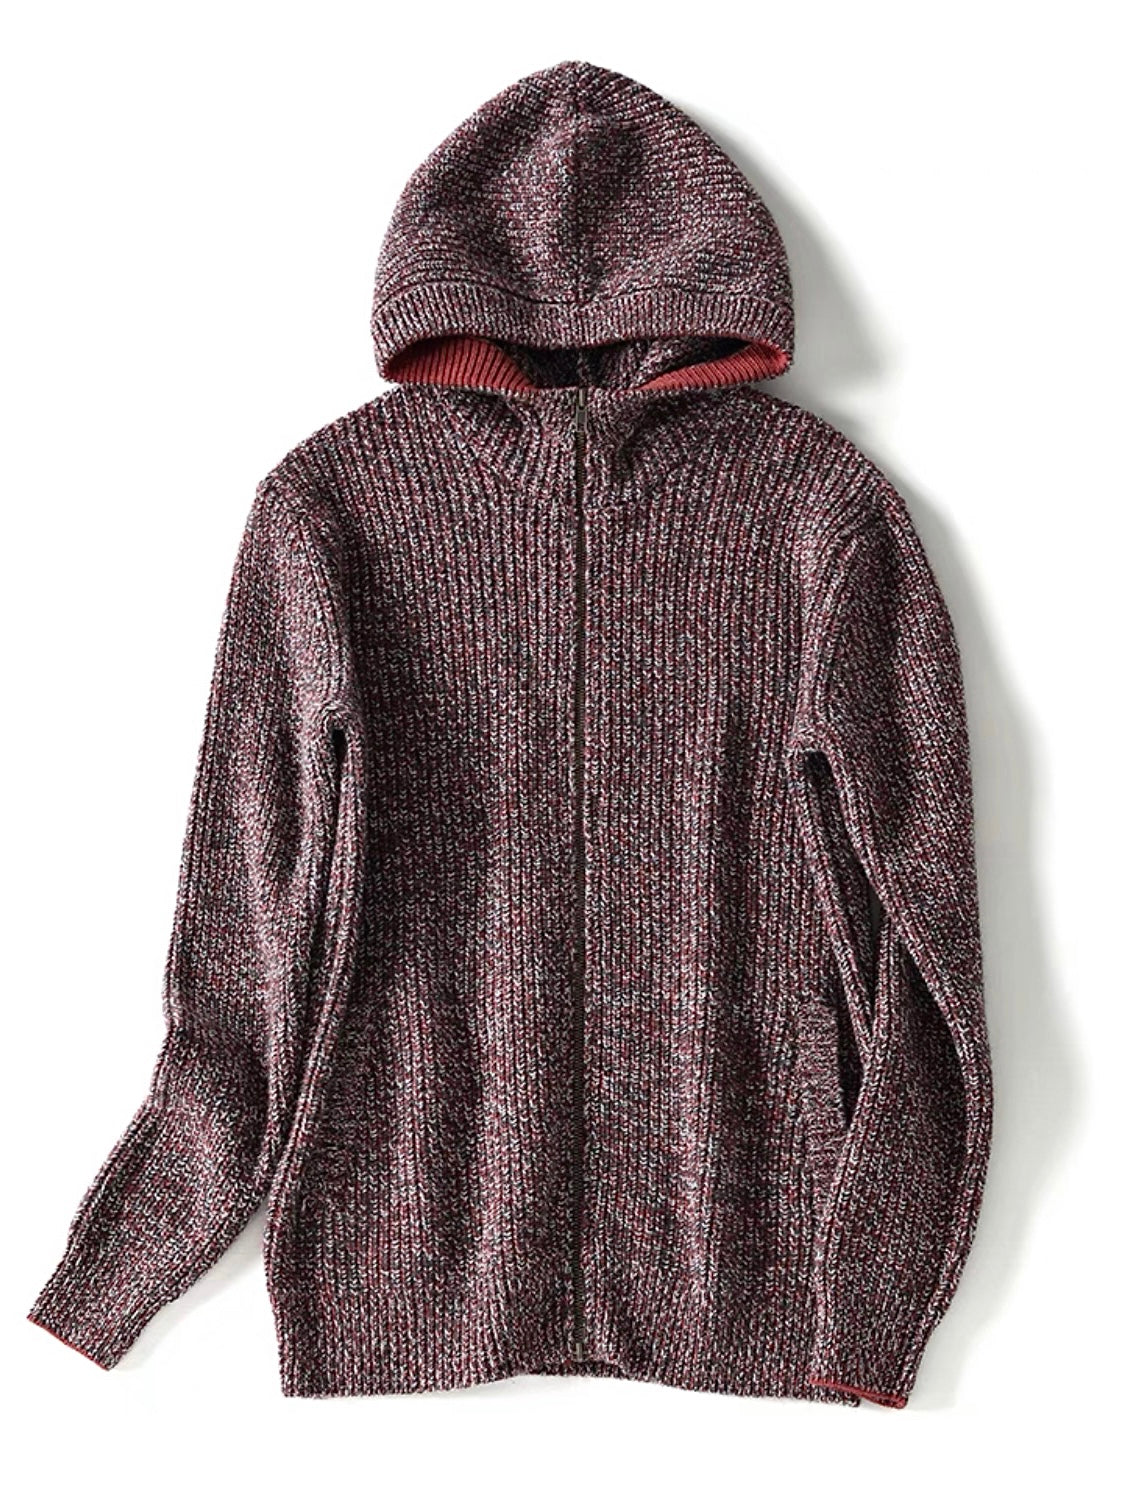 Brick Red Cashmere Chiné Cardigan